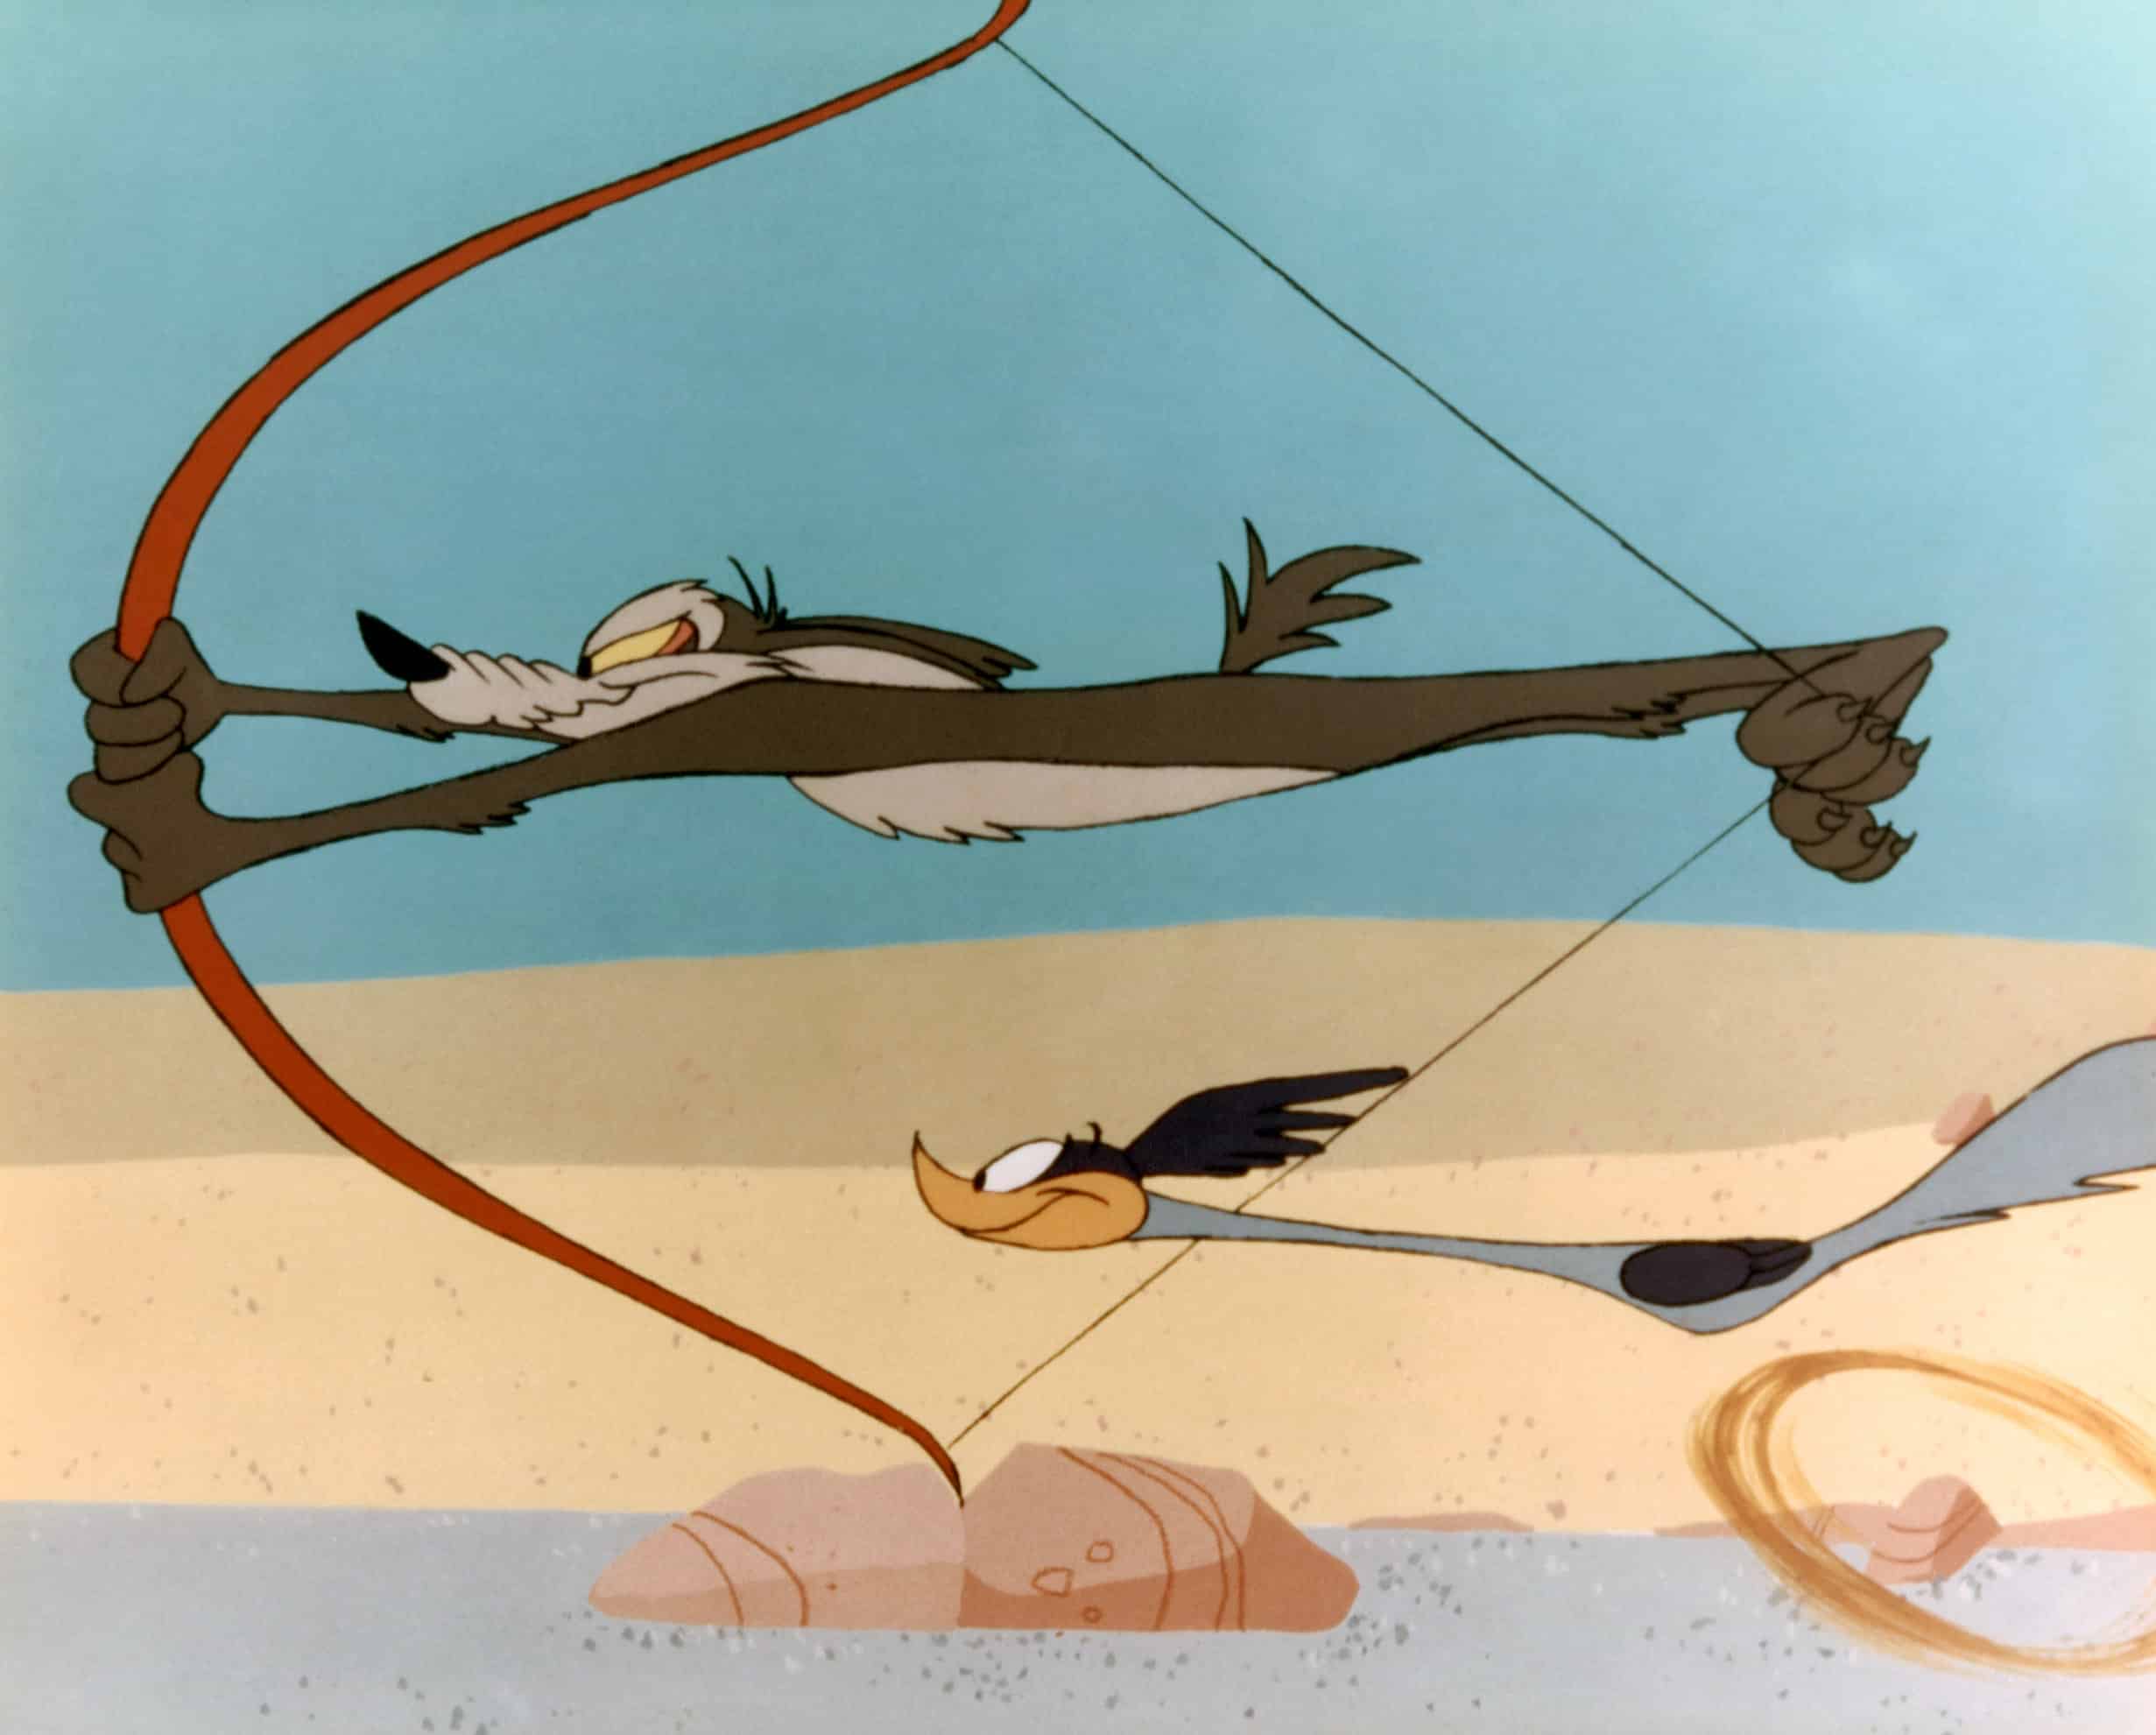 THE ROAD RUNNER SHOW, Wile E. Coyote, Road Runner, 1966-73 